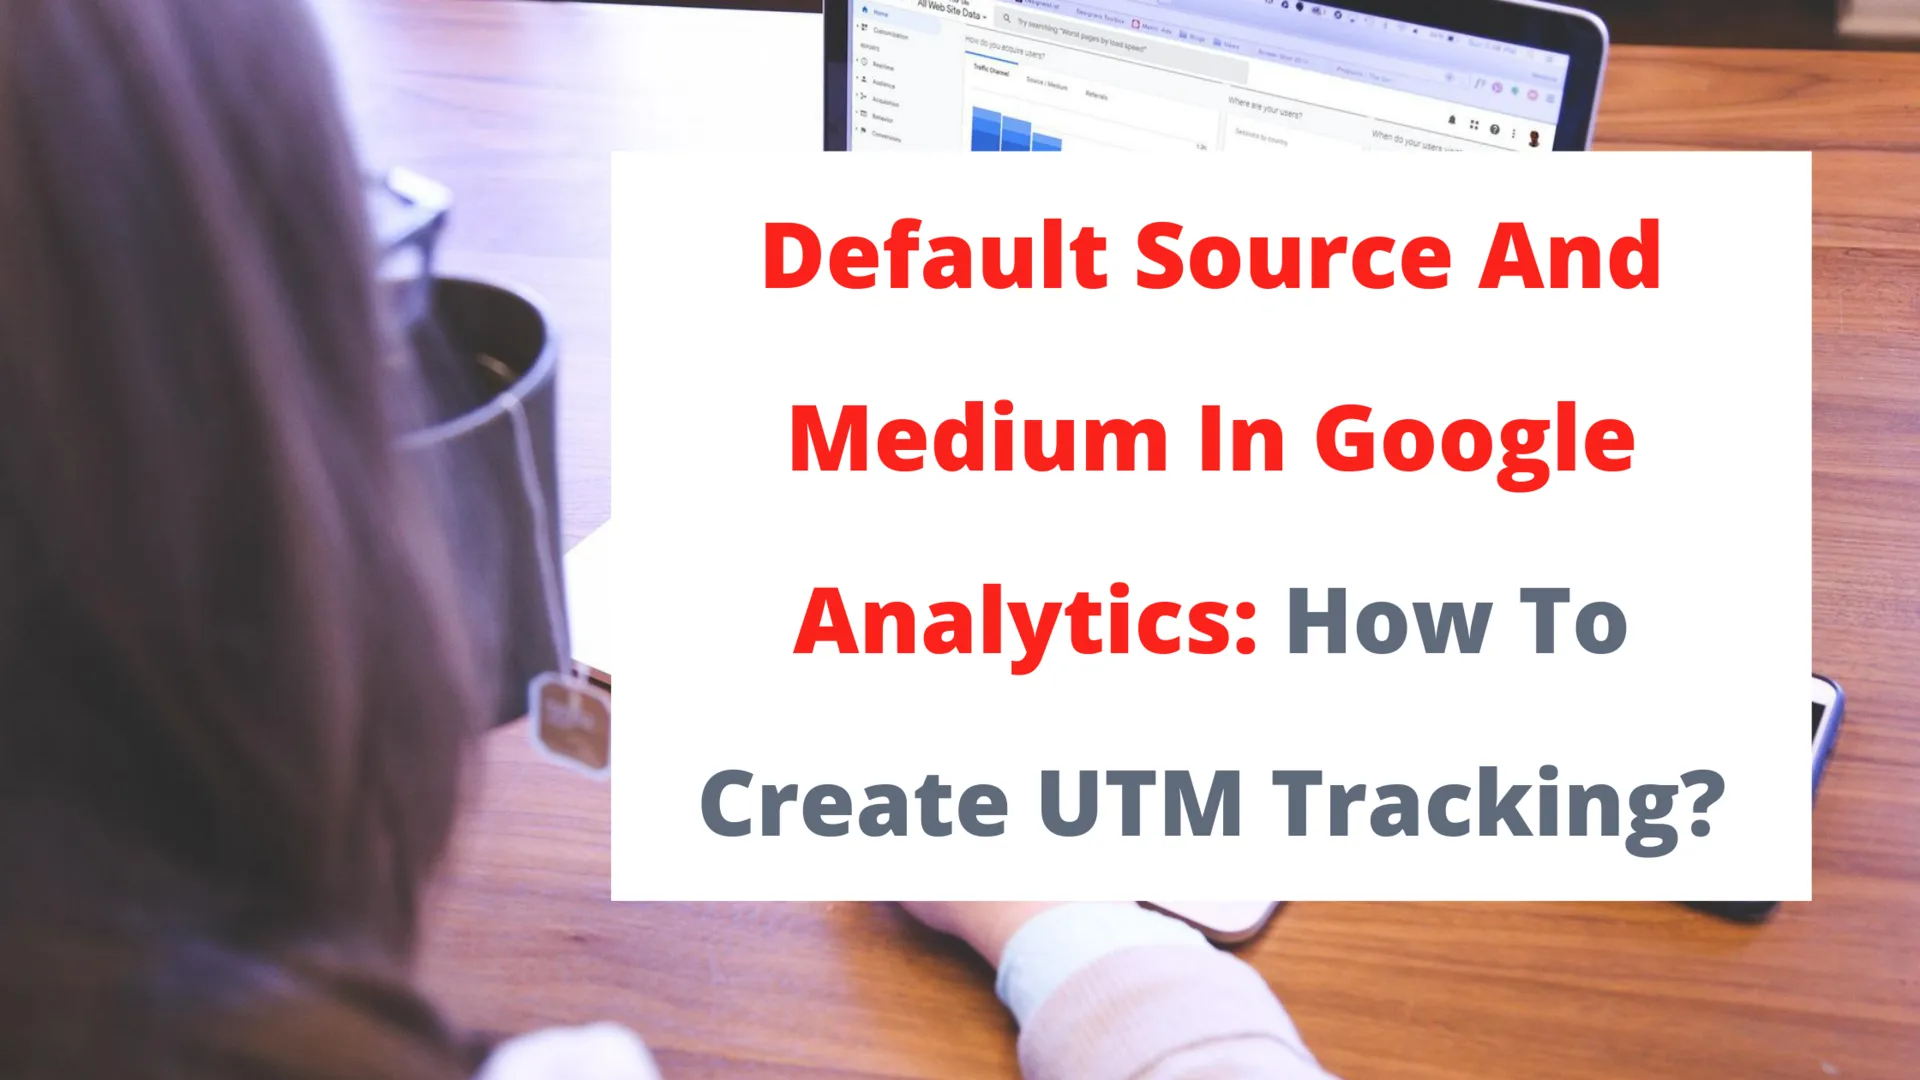 what is not considered a â€œsourceâ€ in google analytics by default?